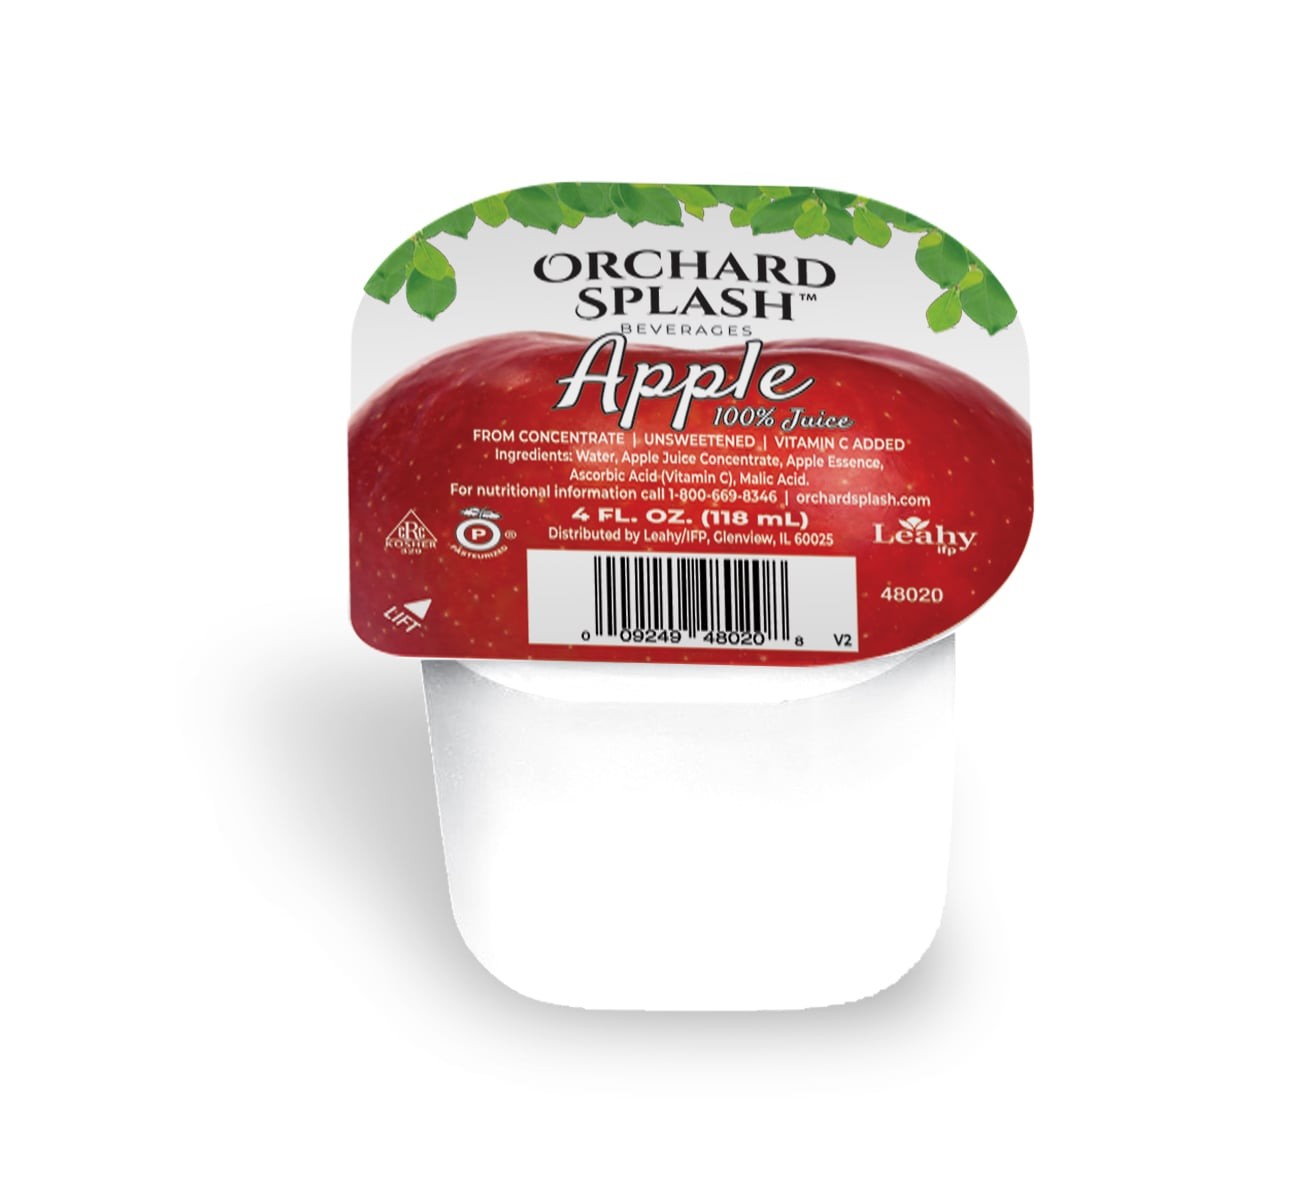 Orchard Splash 4oz Portion Control Juice Cups, Apple 100% (48 Aseptic Cups per Case)